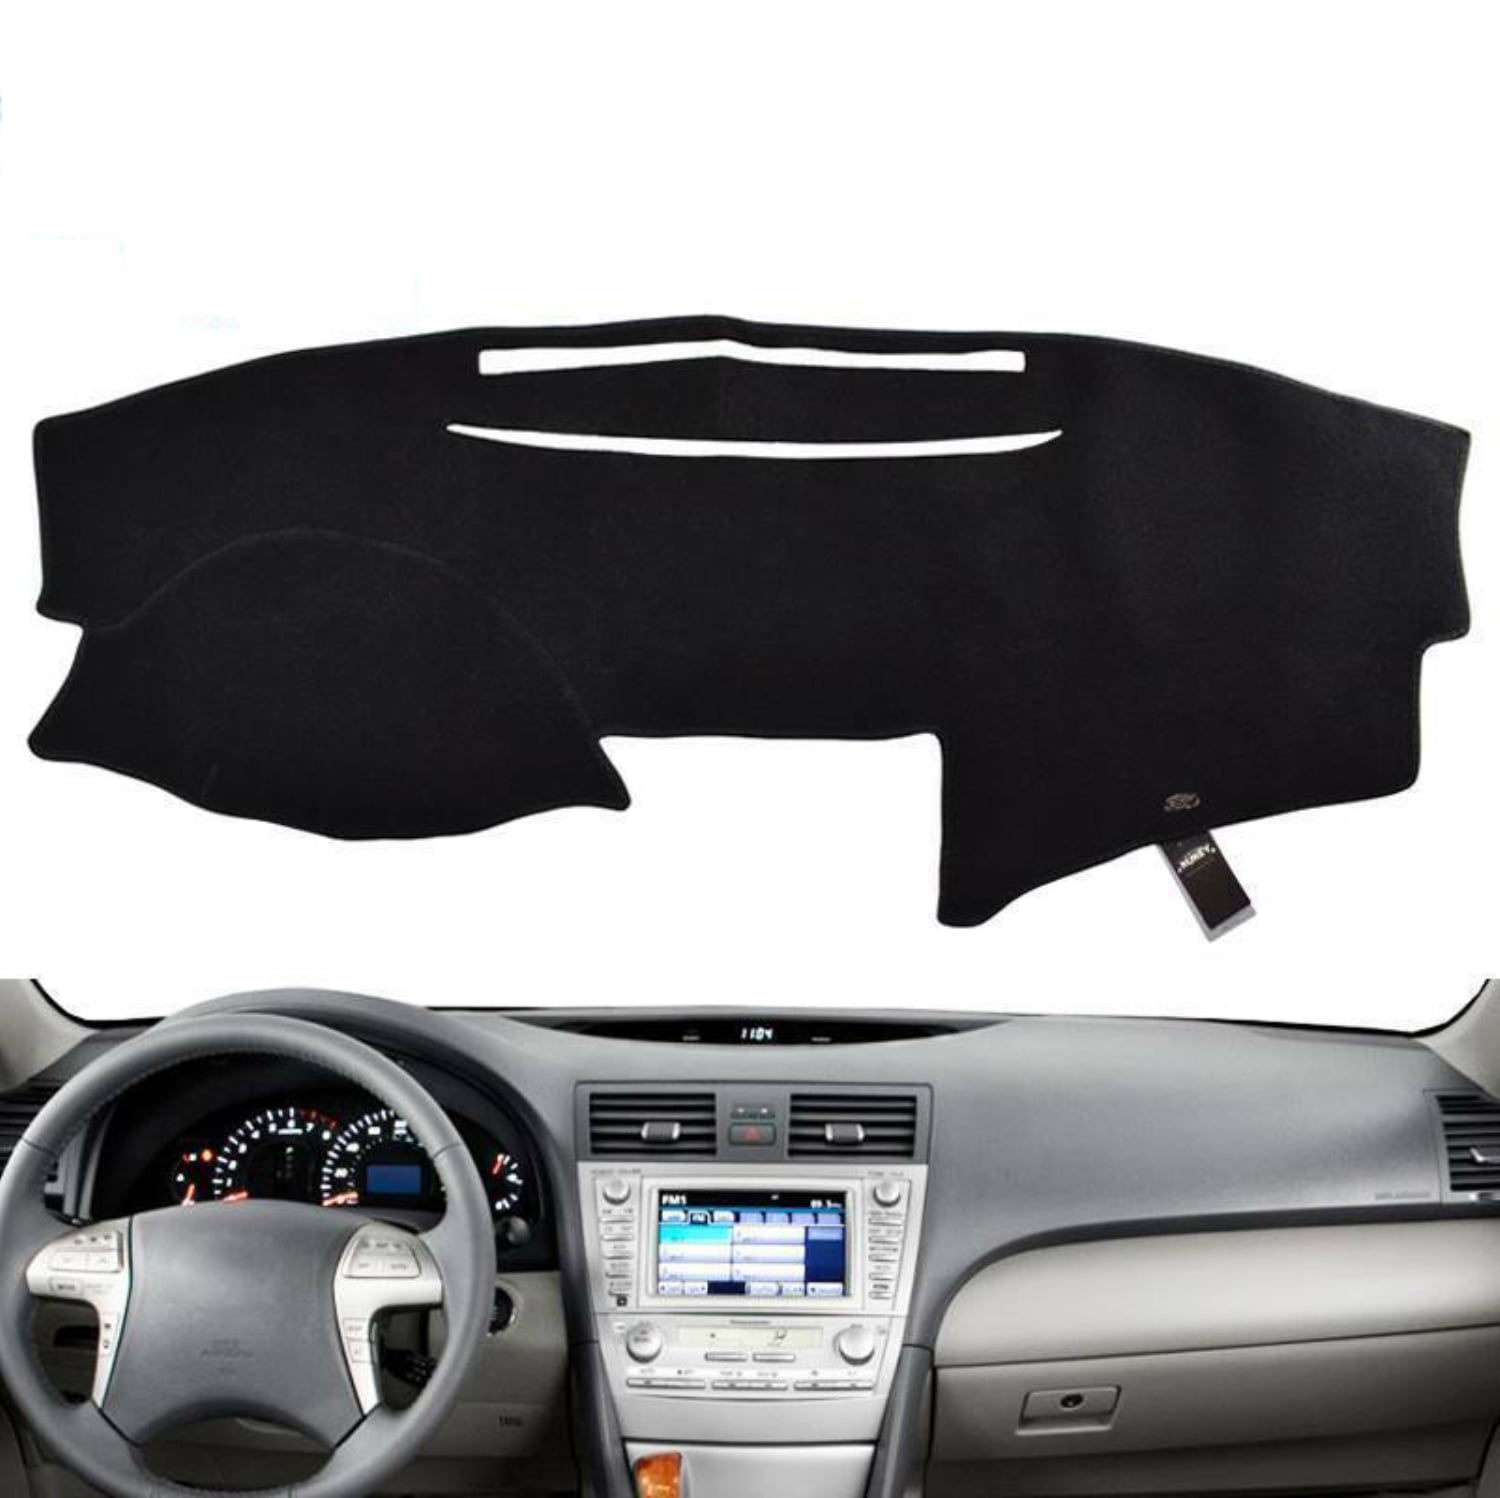 Dash Mat Fit for Toyota camry 2007-2011 carpet dashboard cover in black grey 